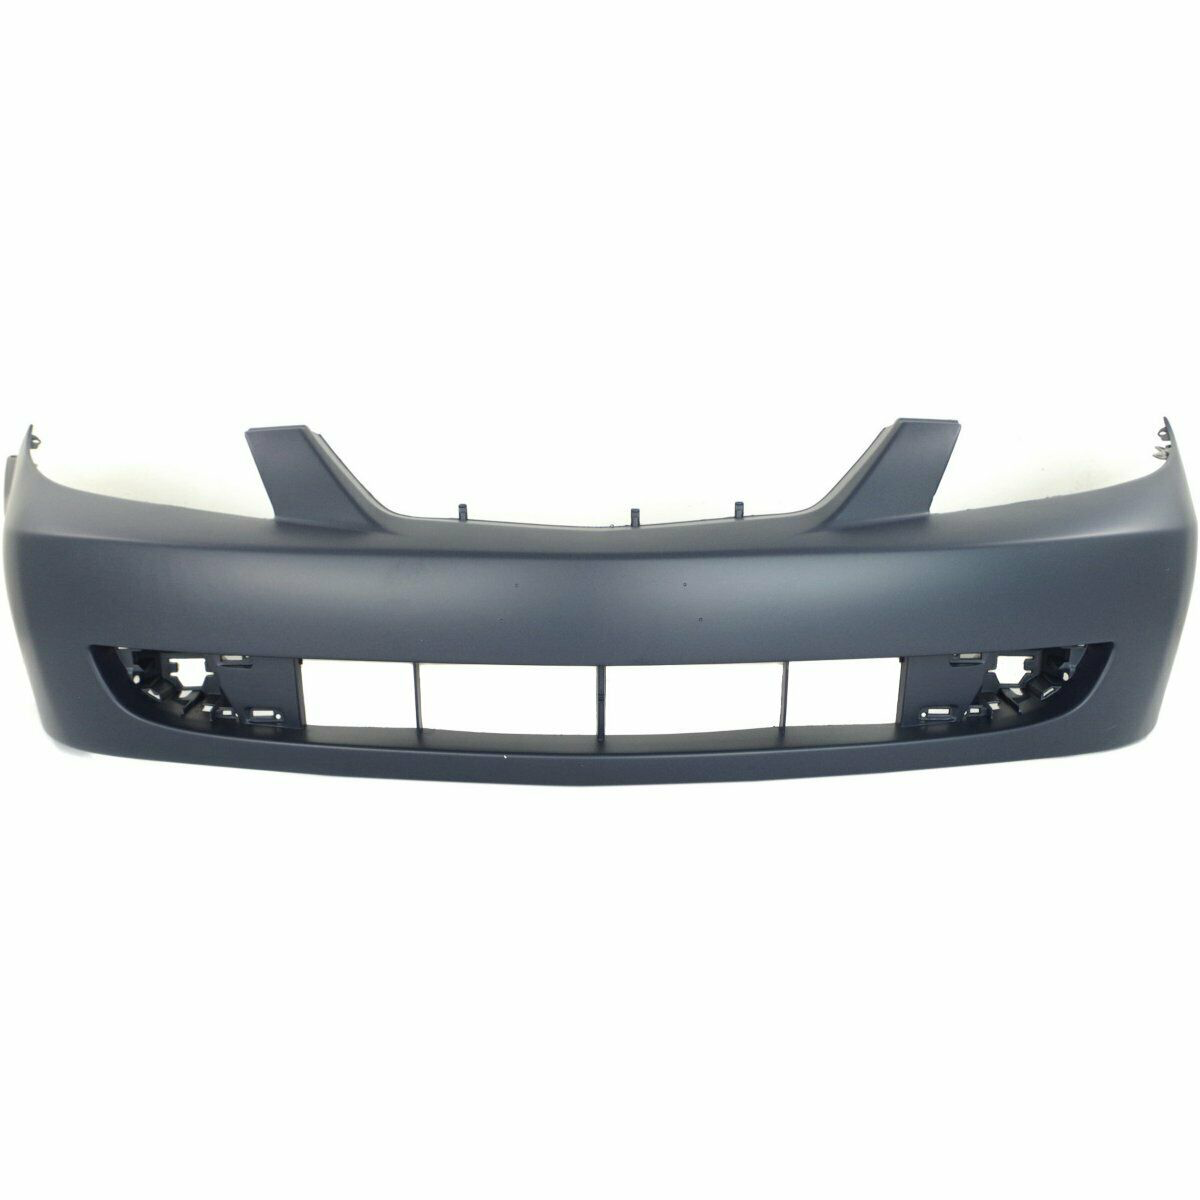 2001-2003 Mazda Protege Front Bumper Painted to Match